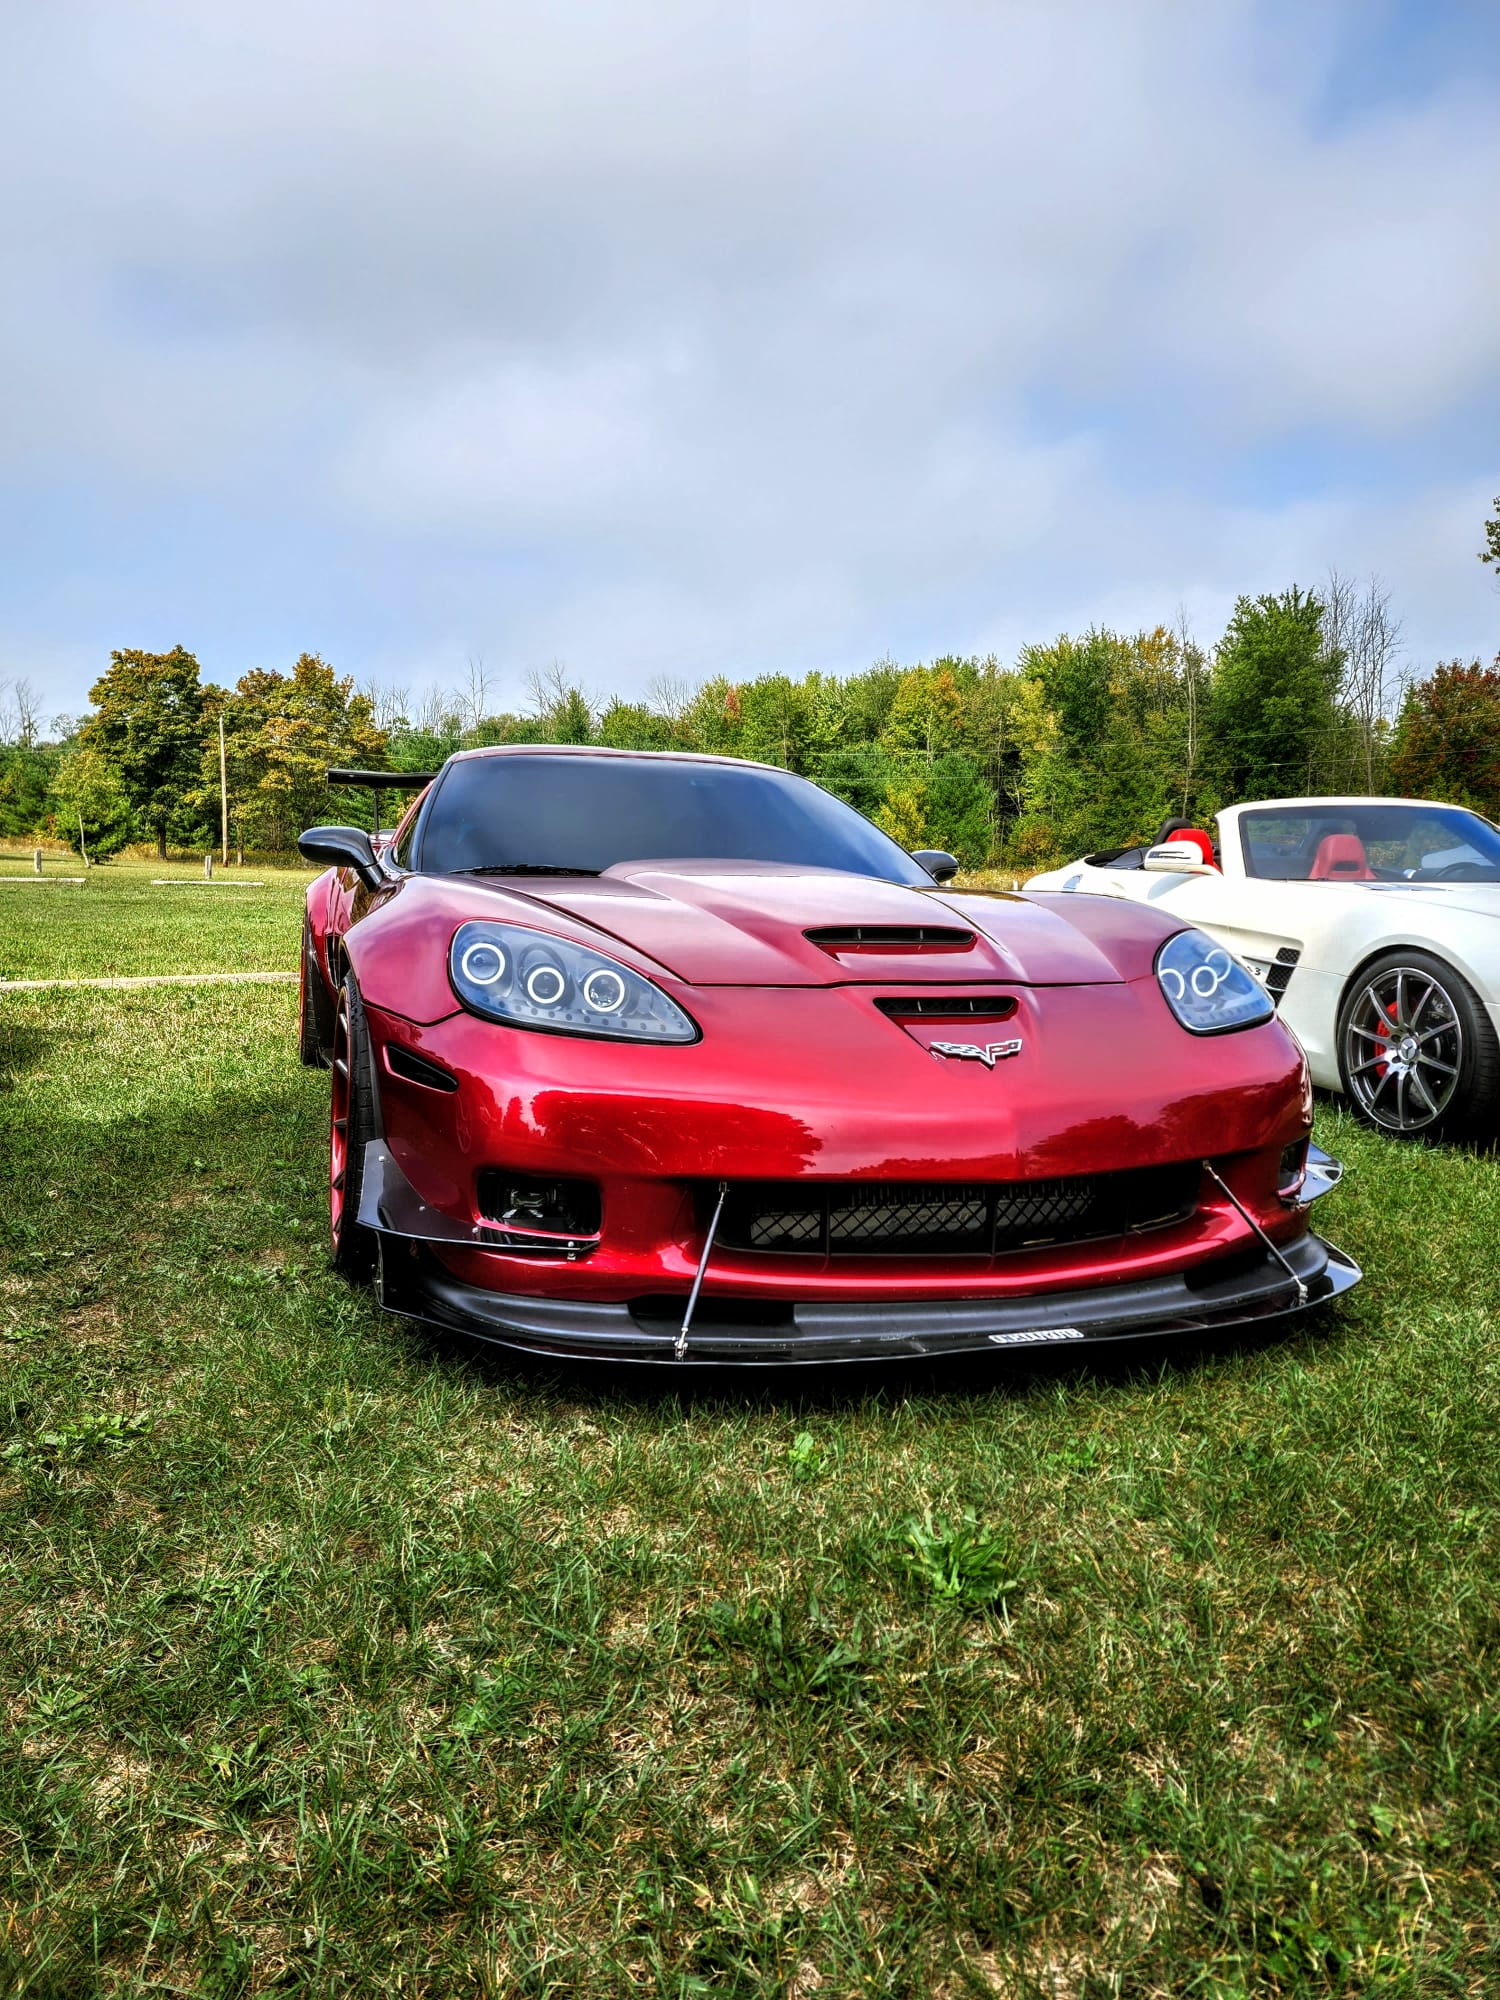 Modified C6 Z06 at a car show